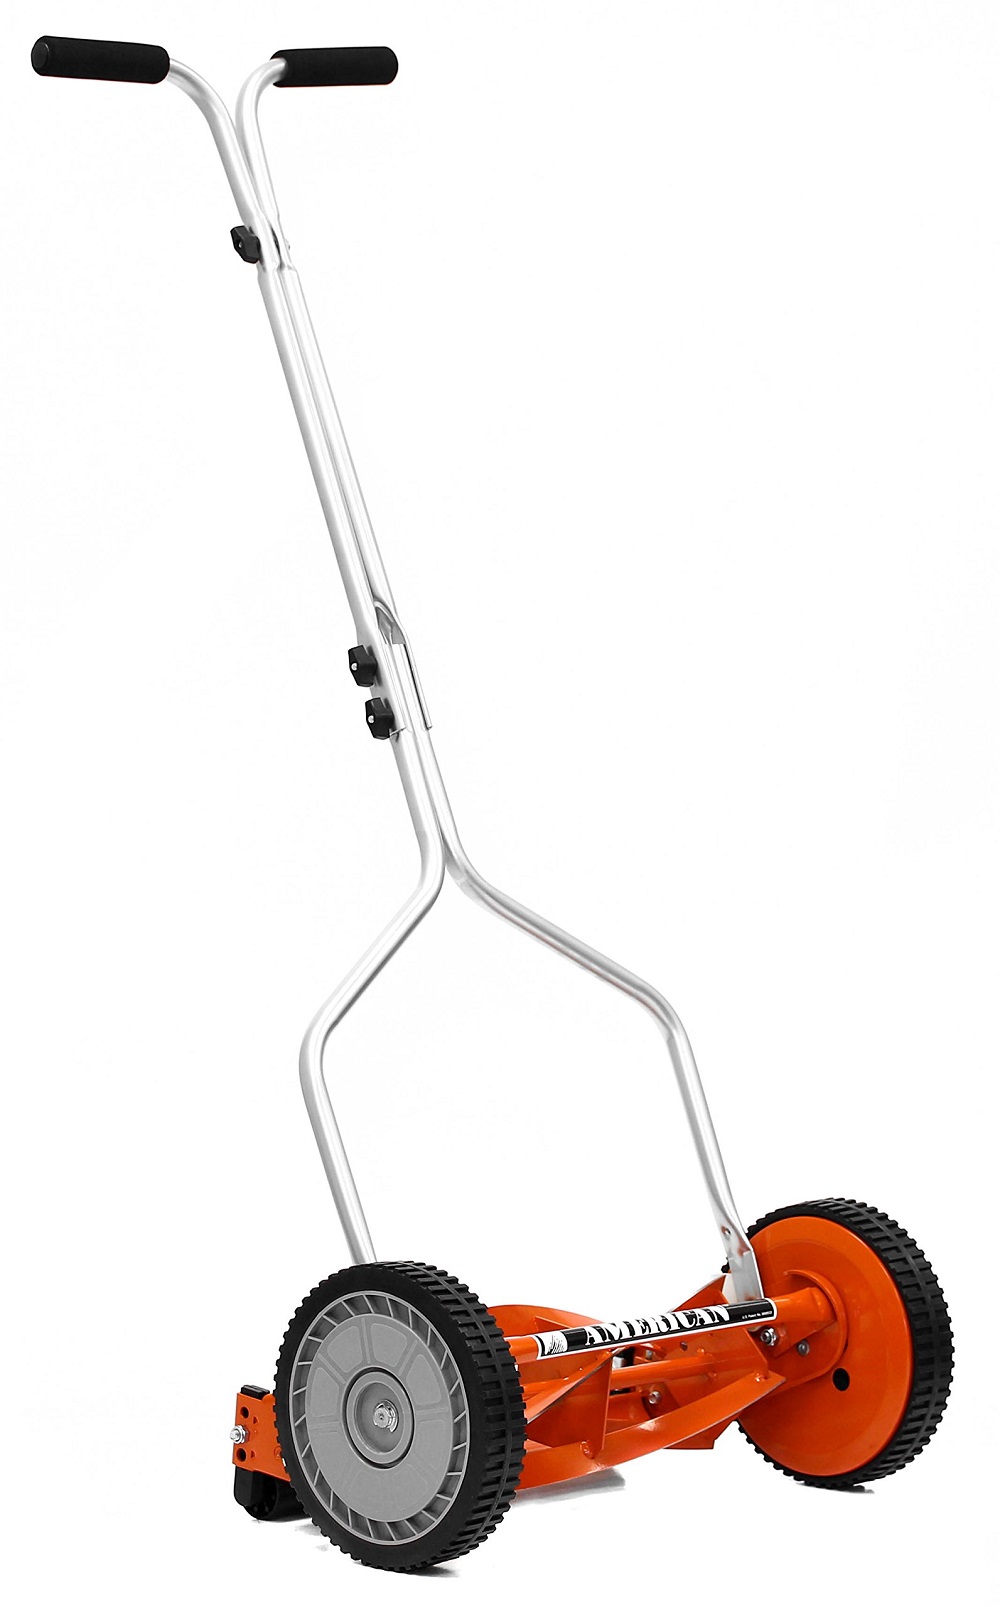 lw1 Small lawn mower options that you can buy online